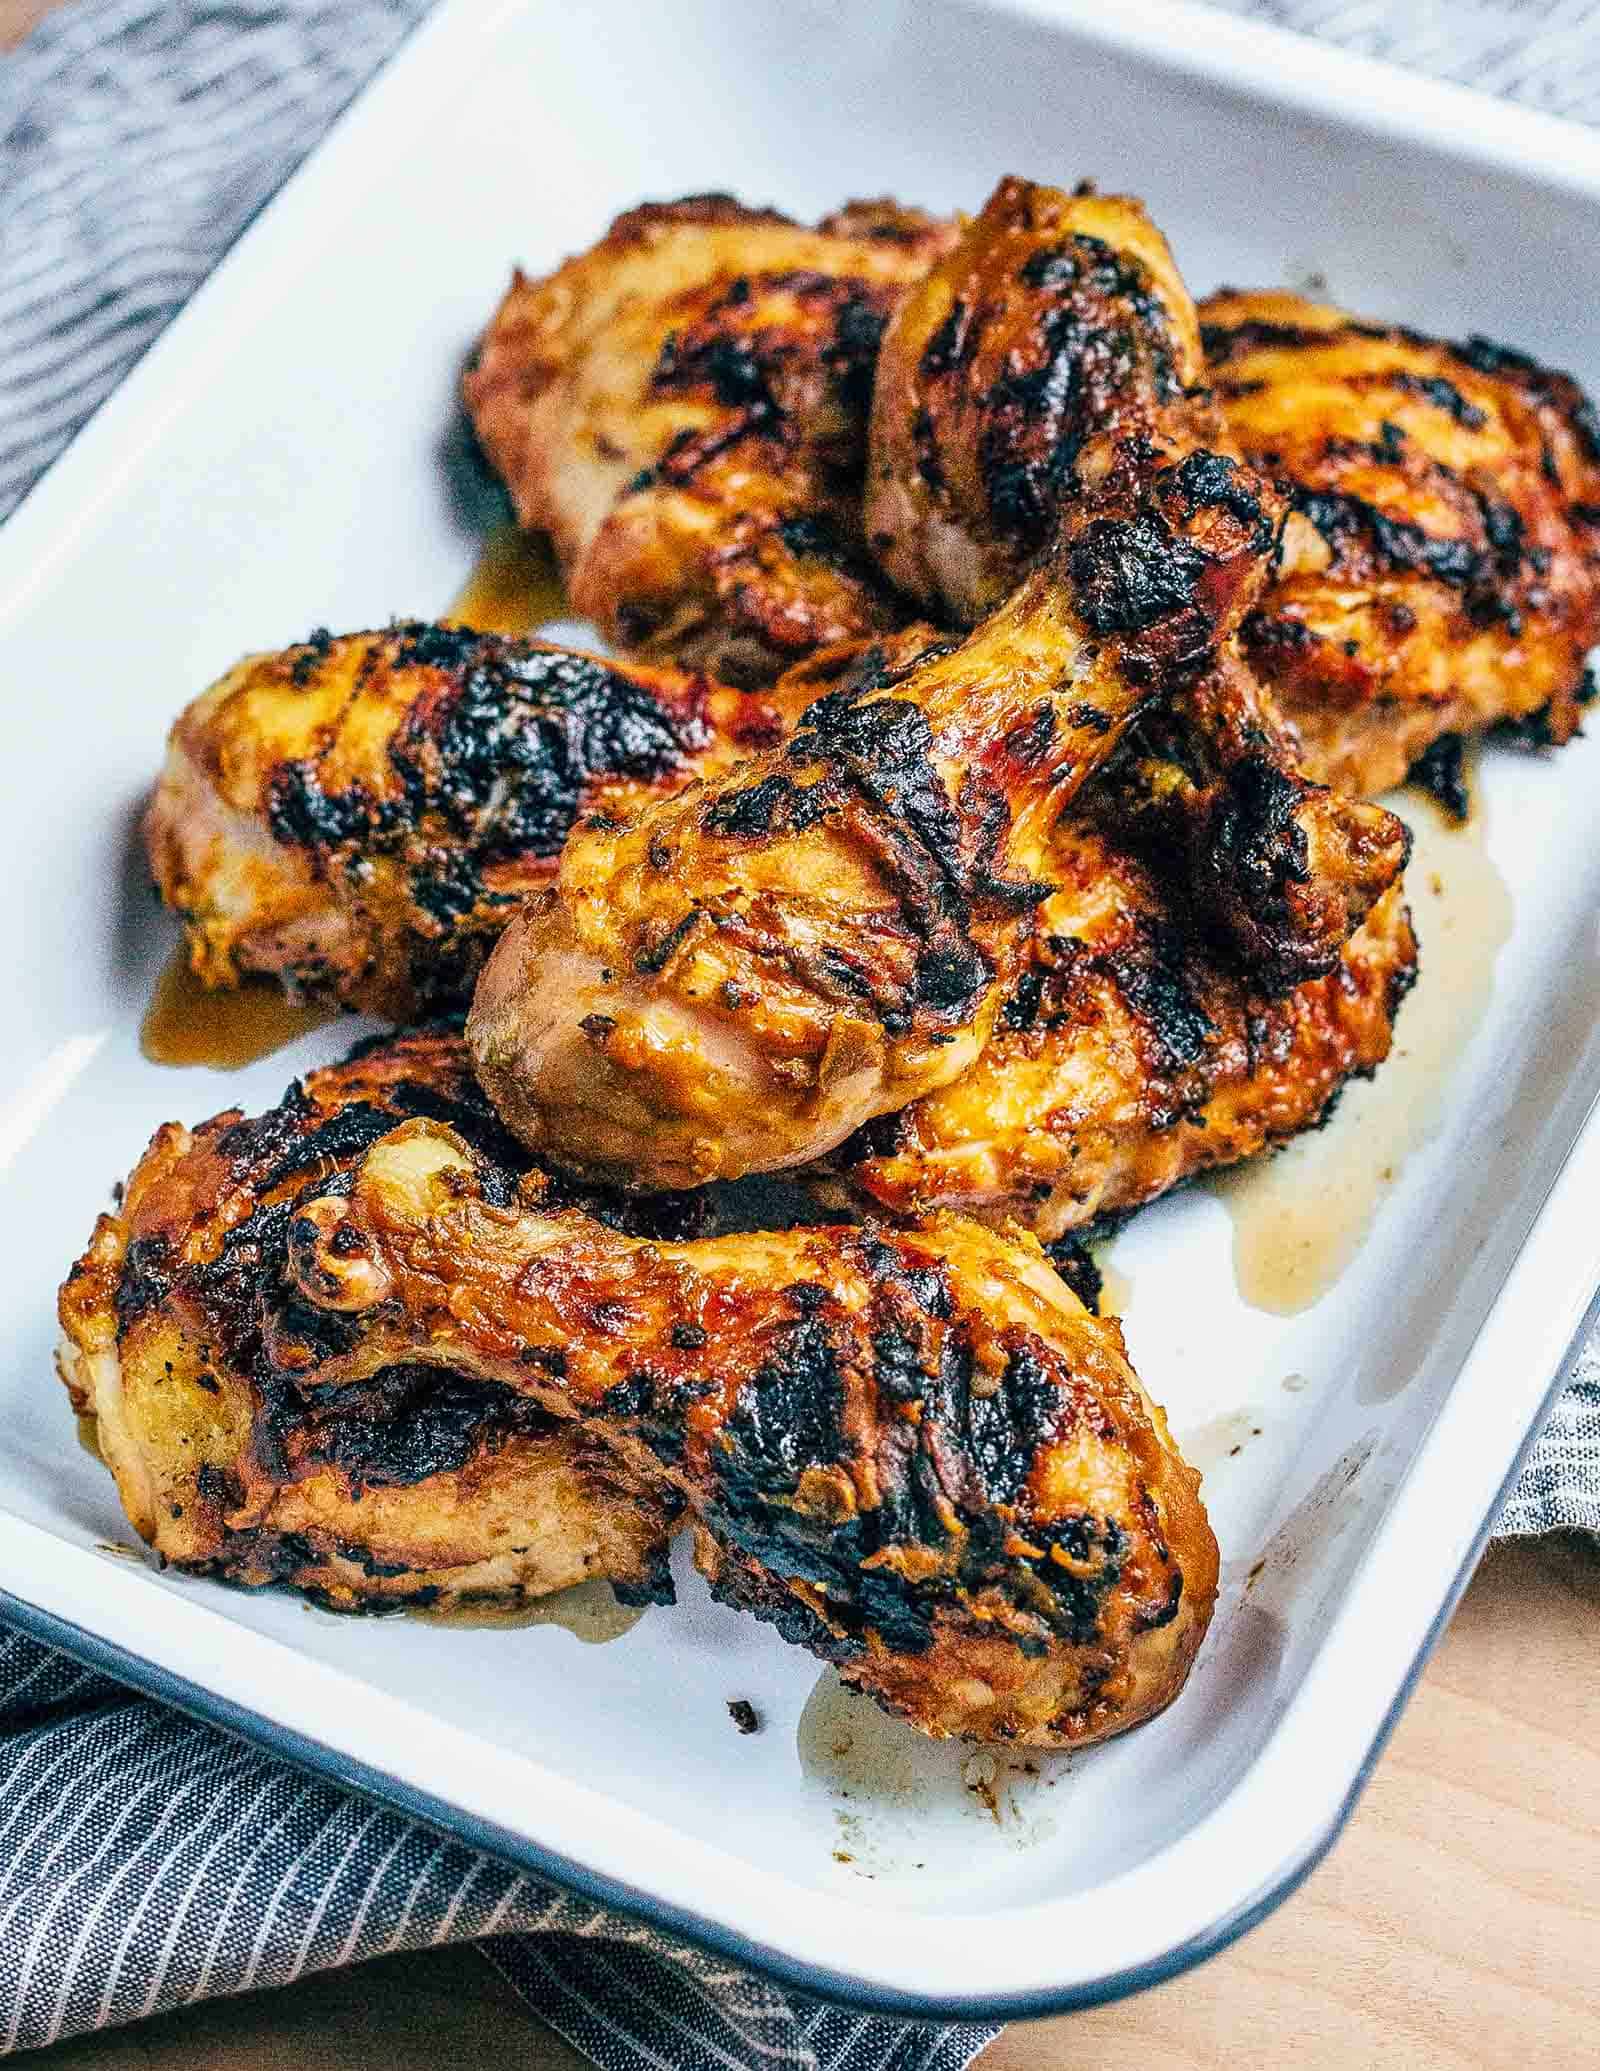 Grilled chicken with south carolina style bbq sauce